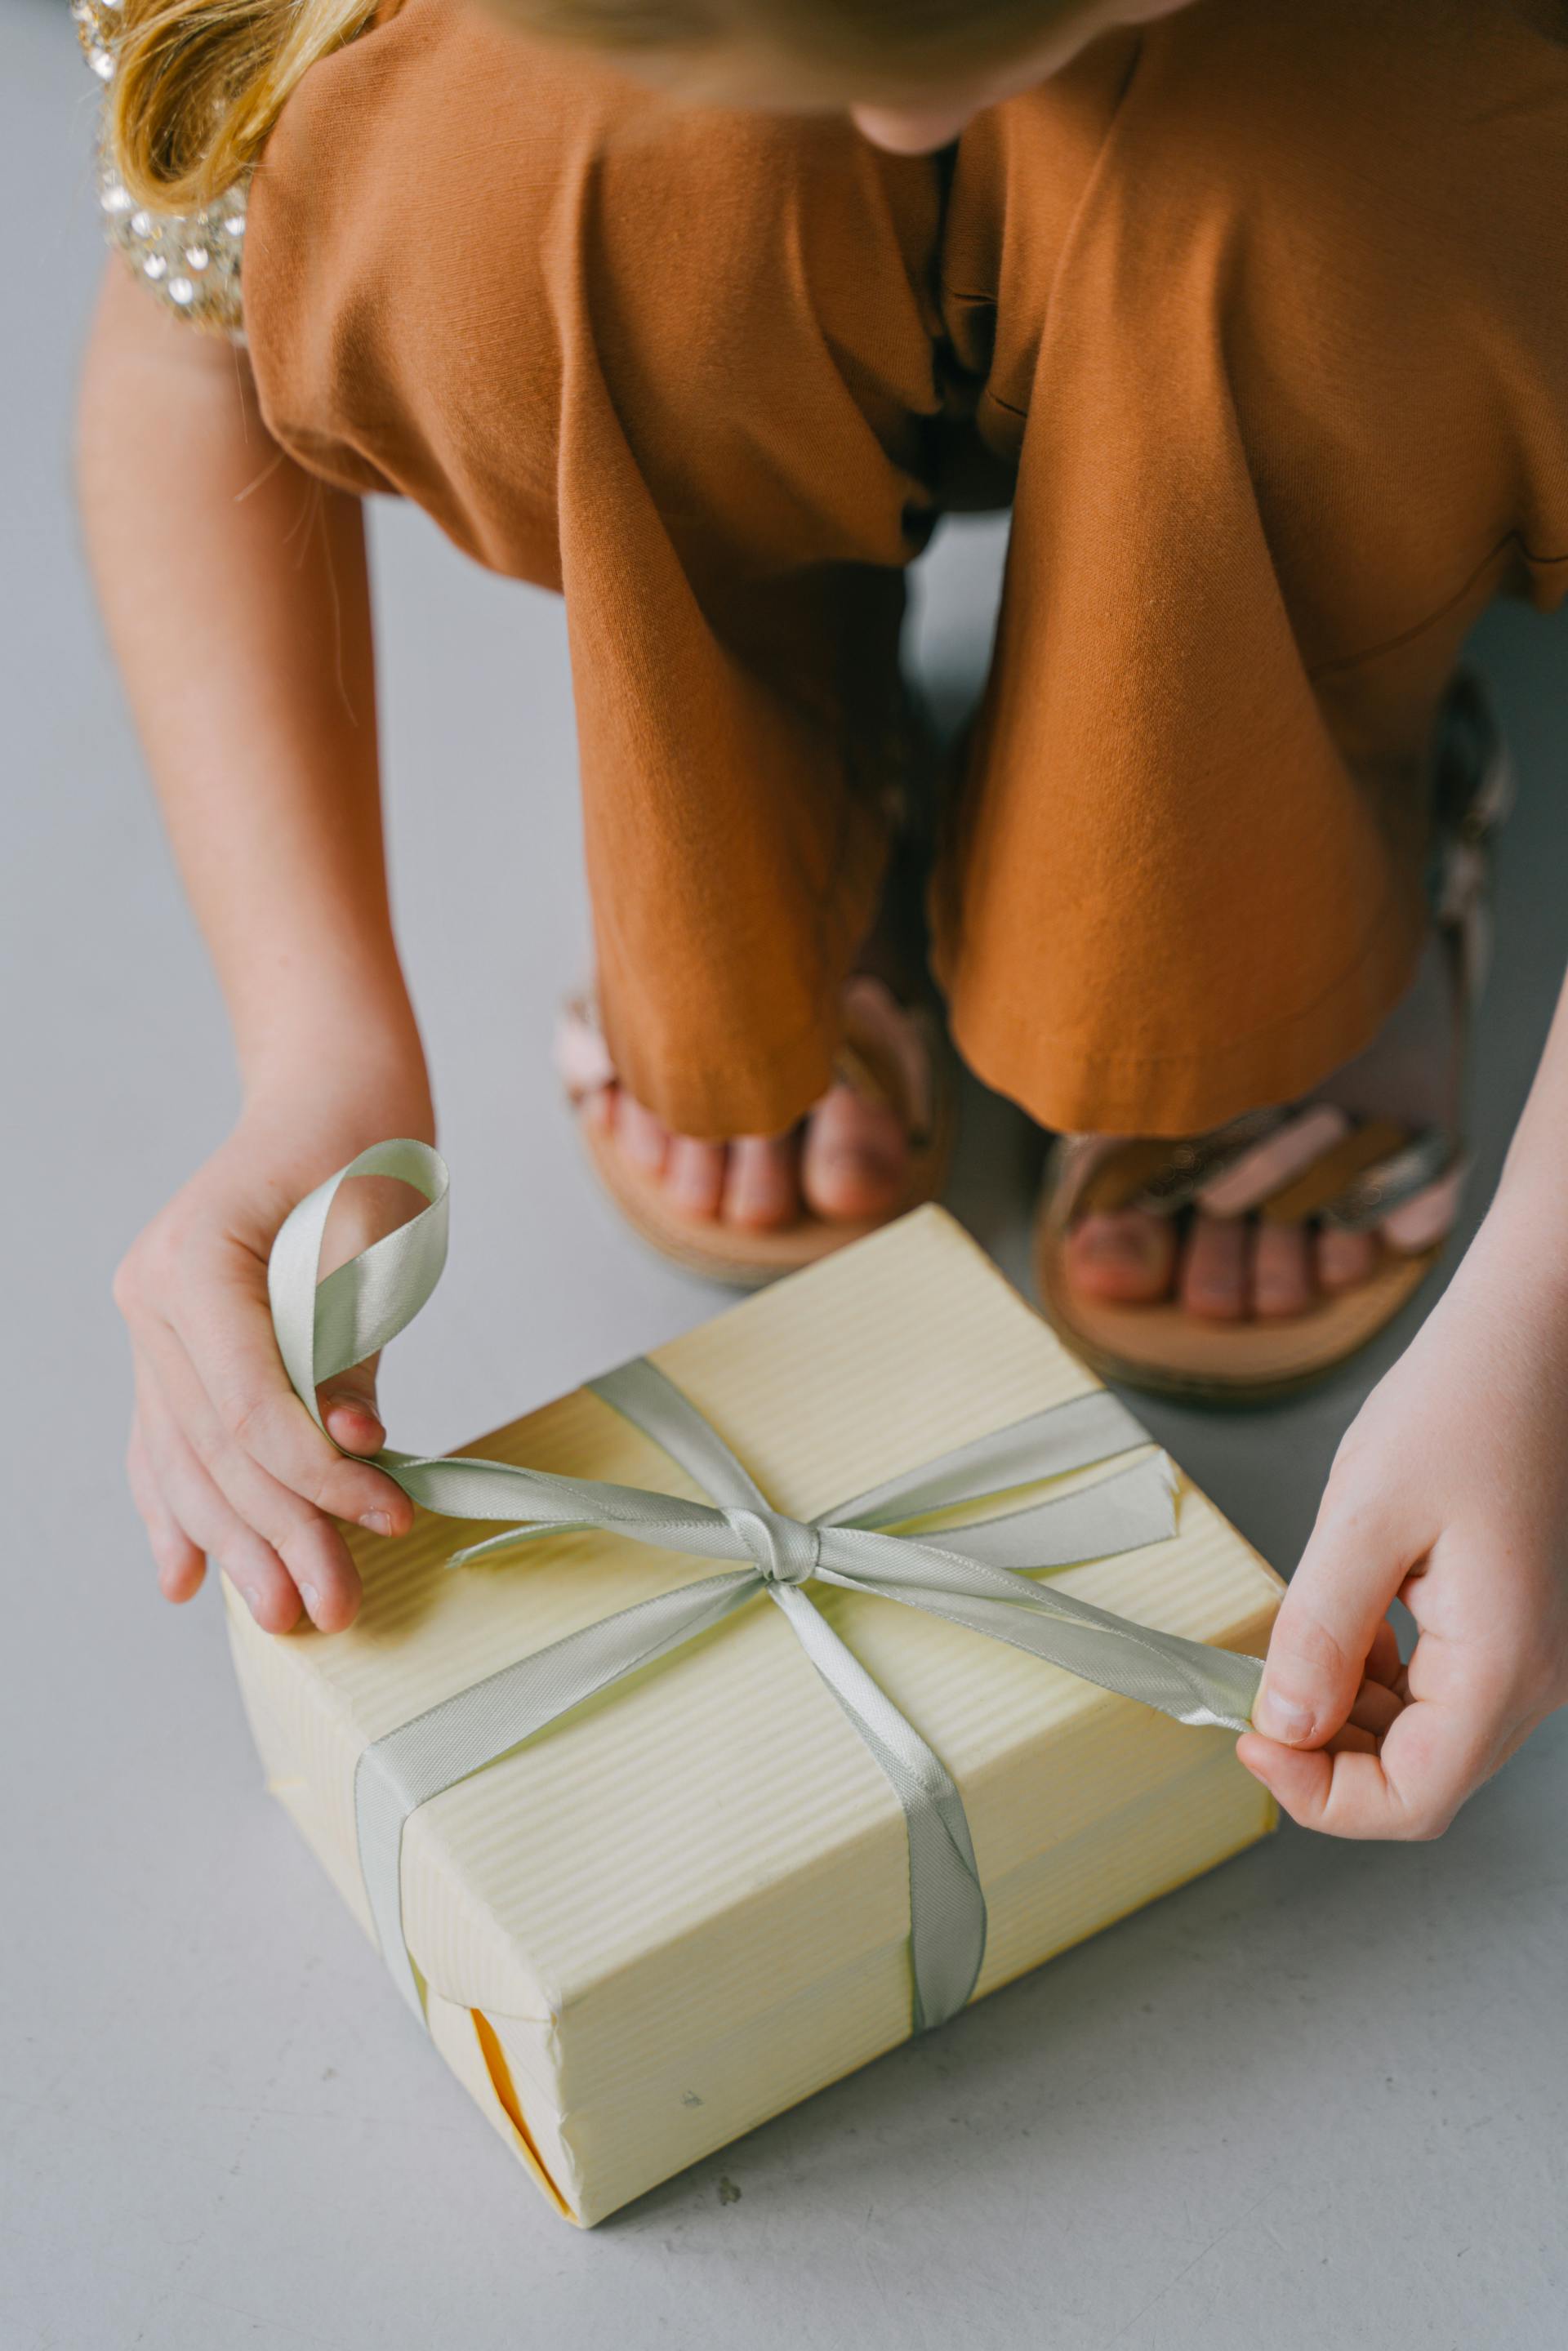 A woman tying the ribbon on a gift box | Source: Pexels